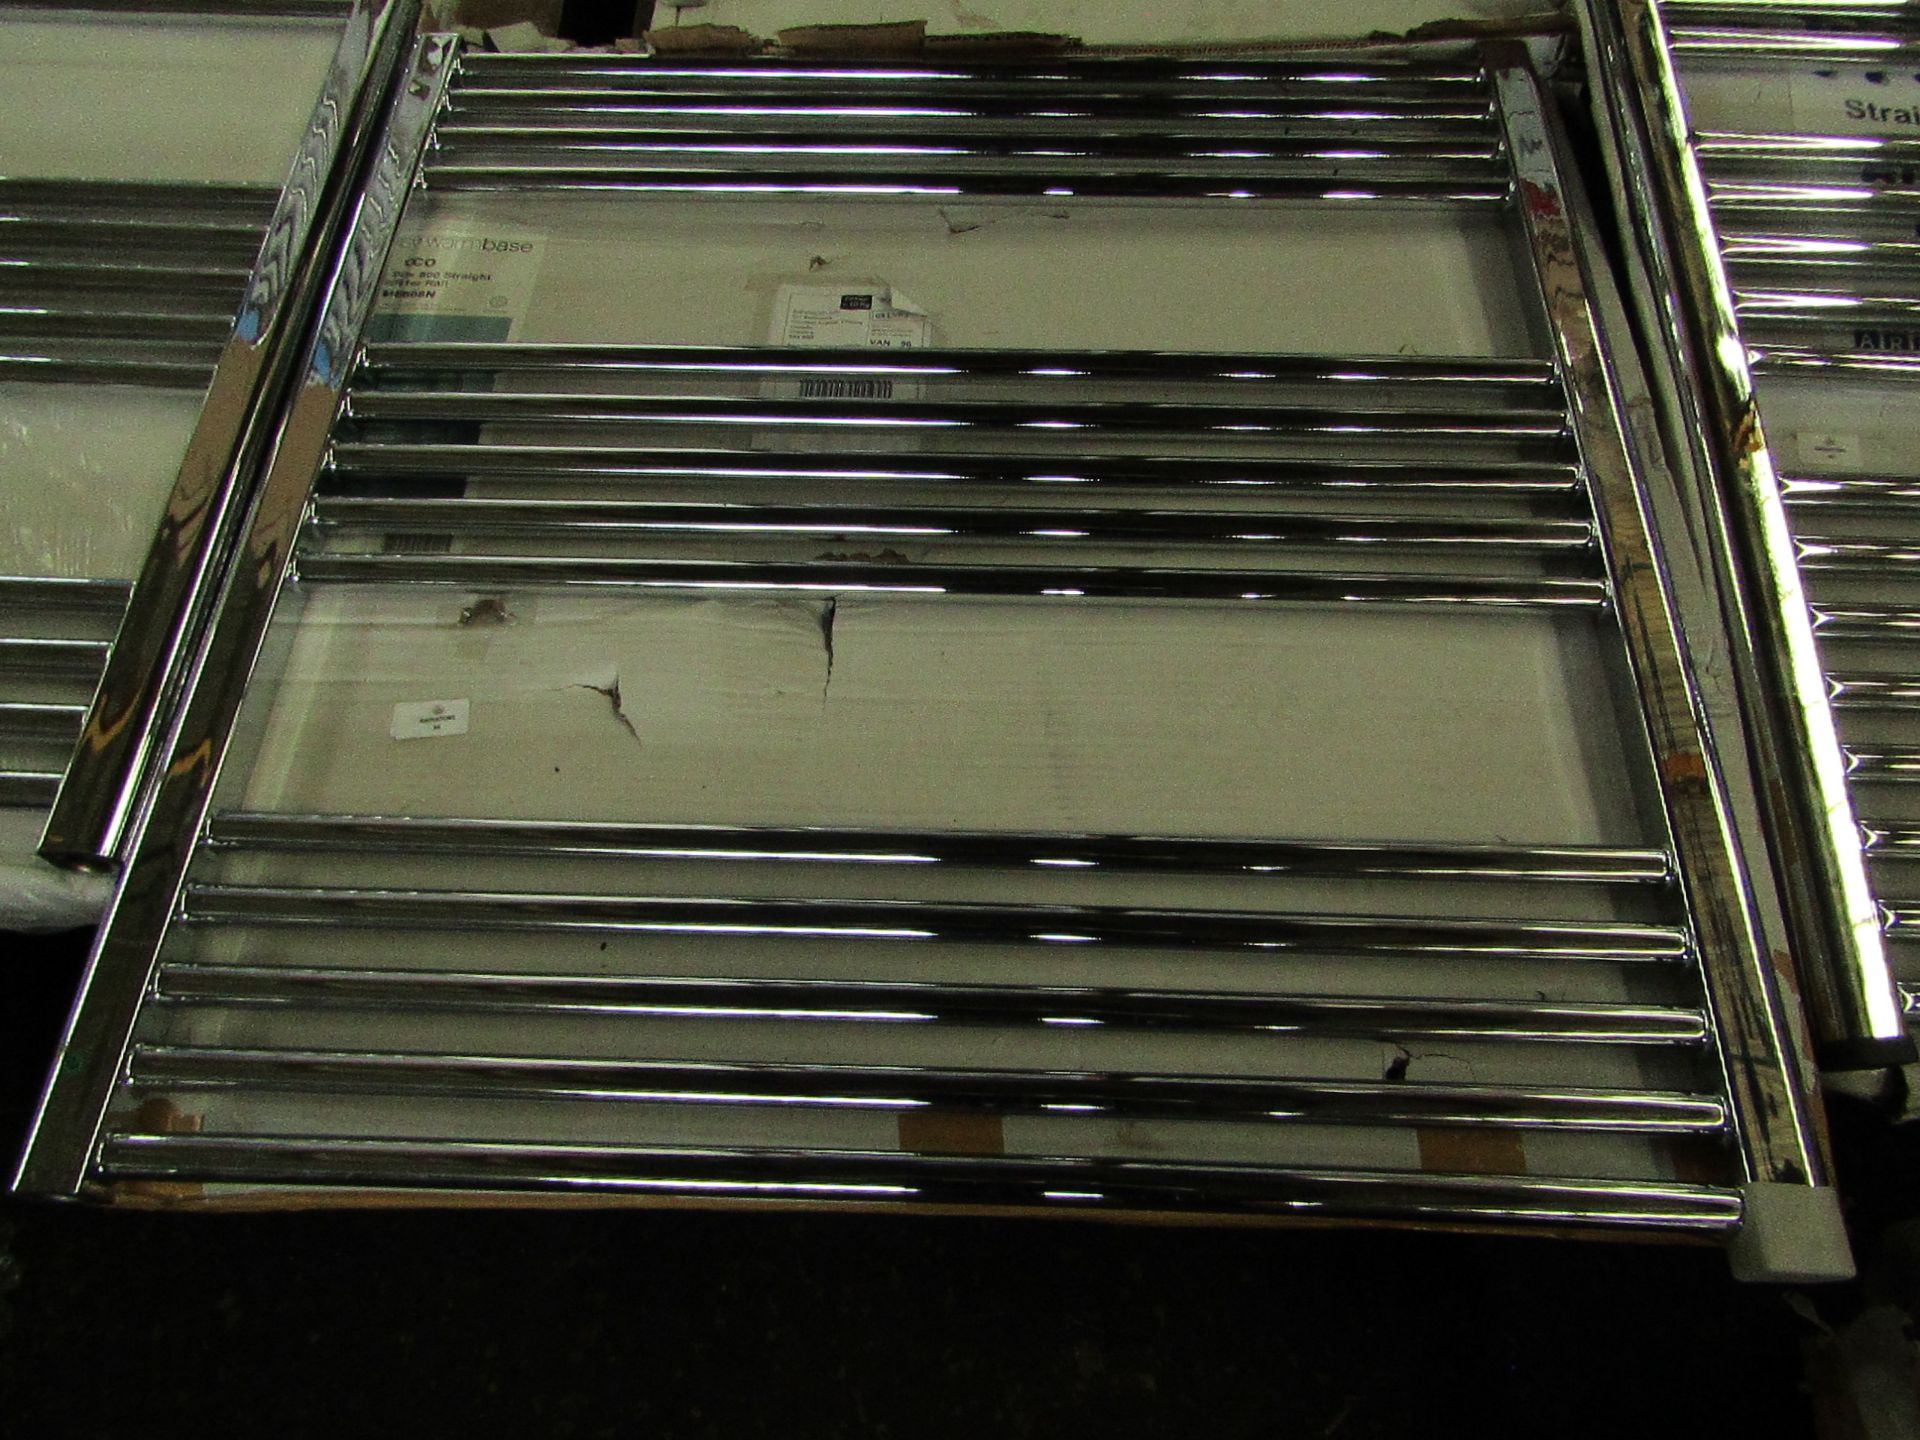 Warm Base - Loco Straight Ladder Towel Rail Chrome - 800x800mm - Looks To Be In Good Condition,